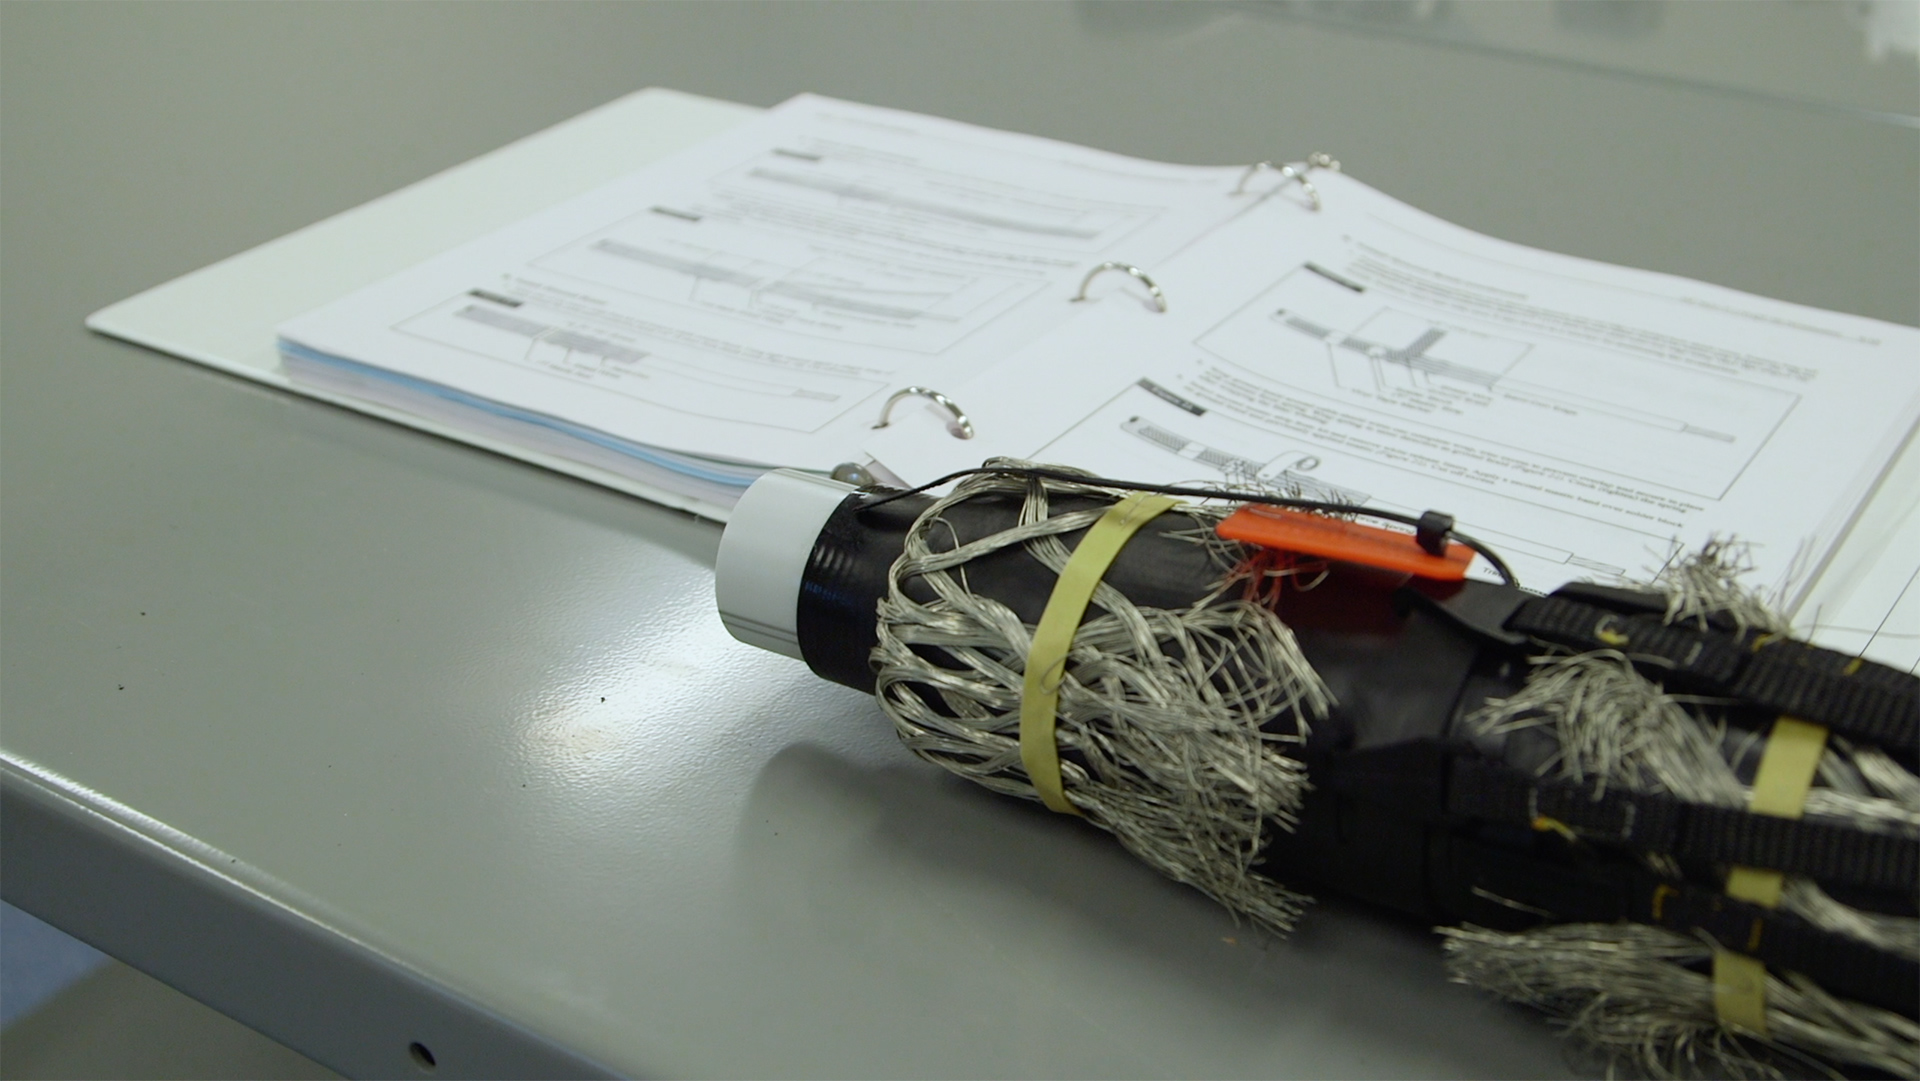 National Cable Splicing Certification Testing